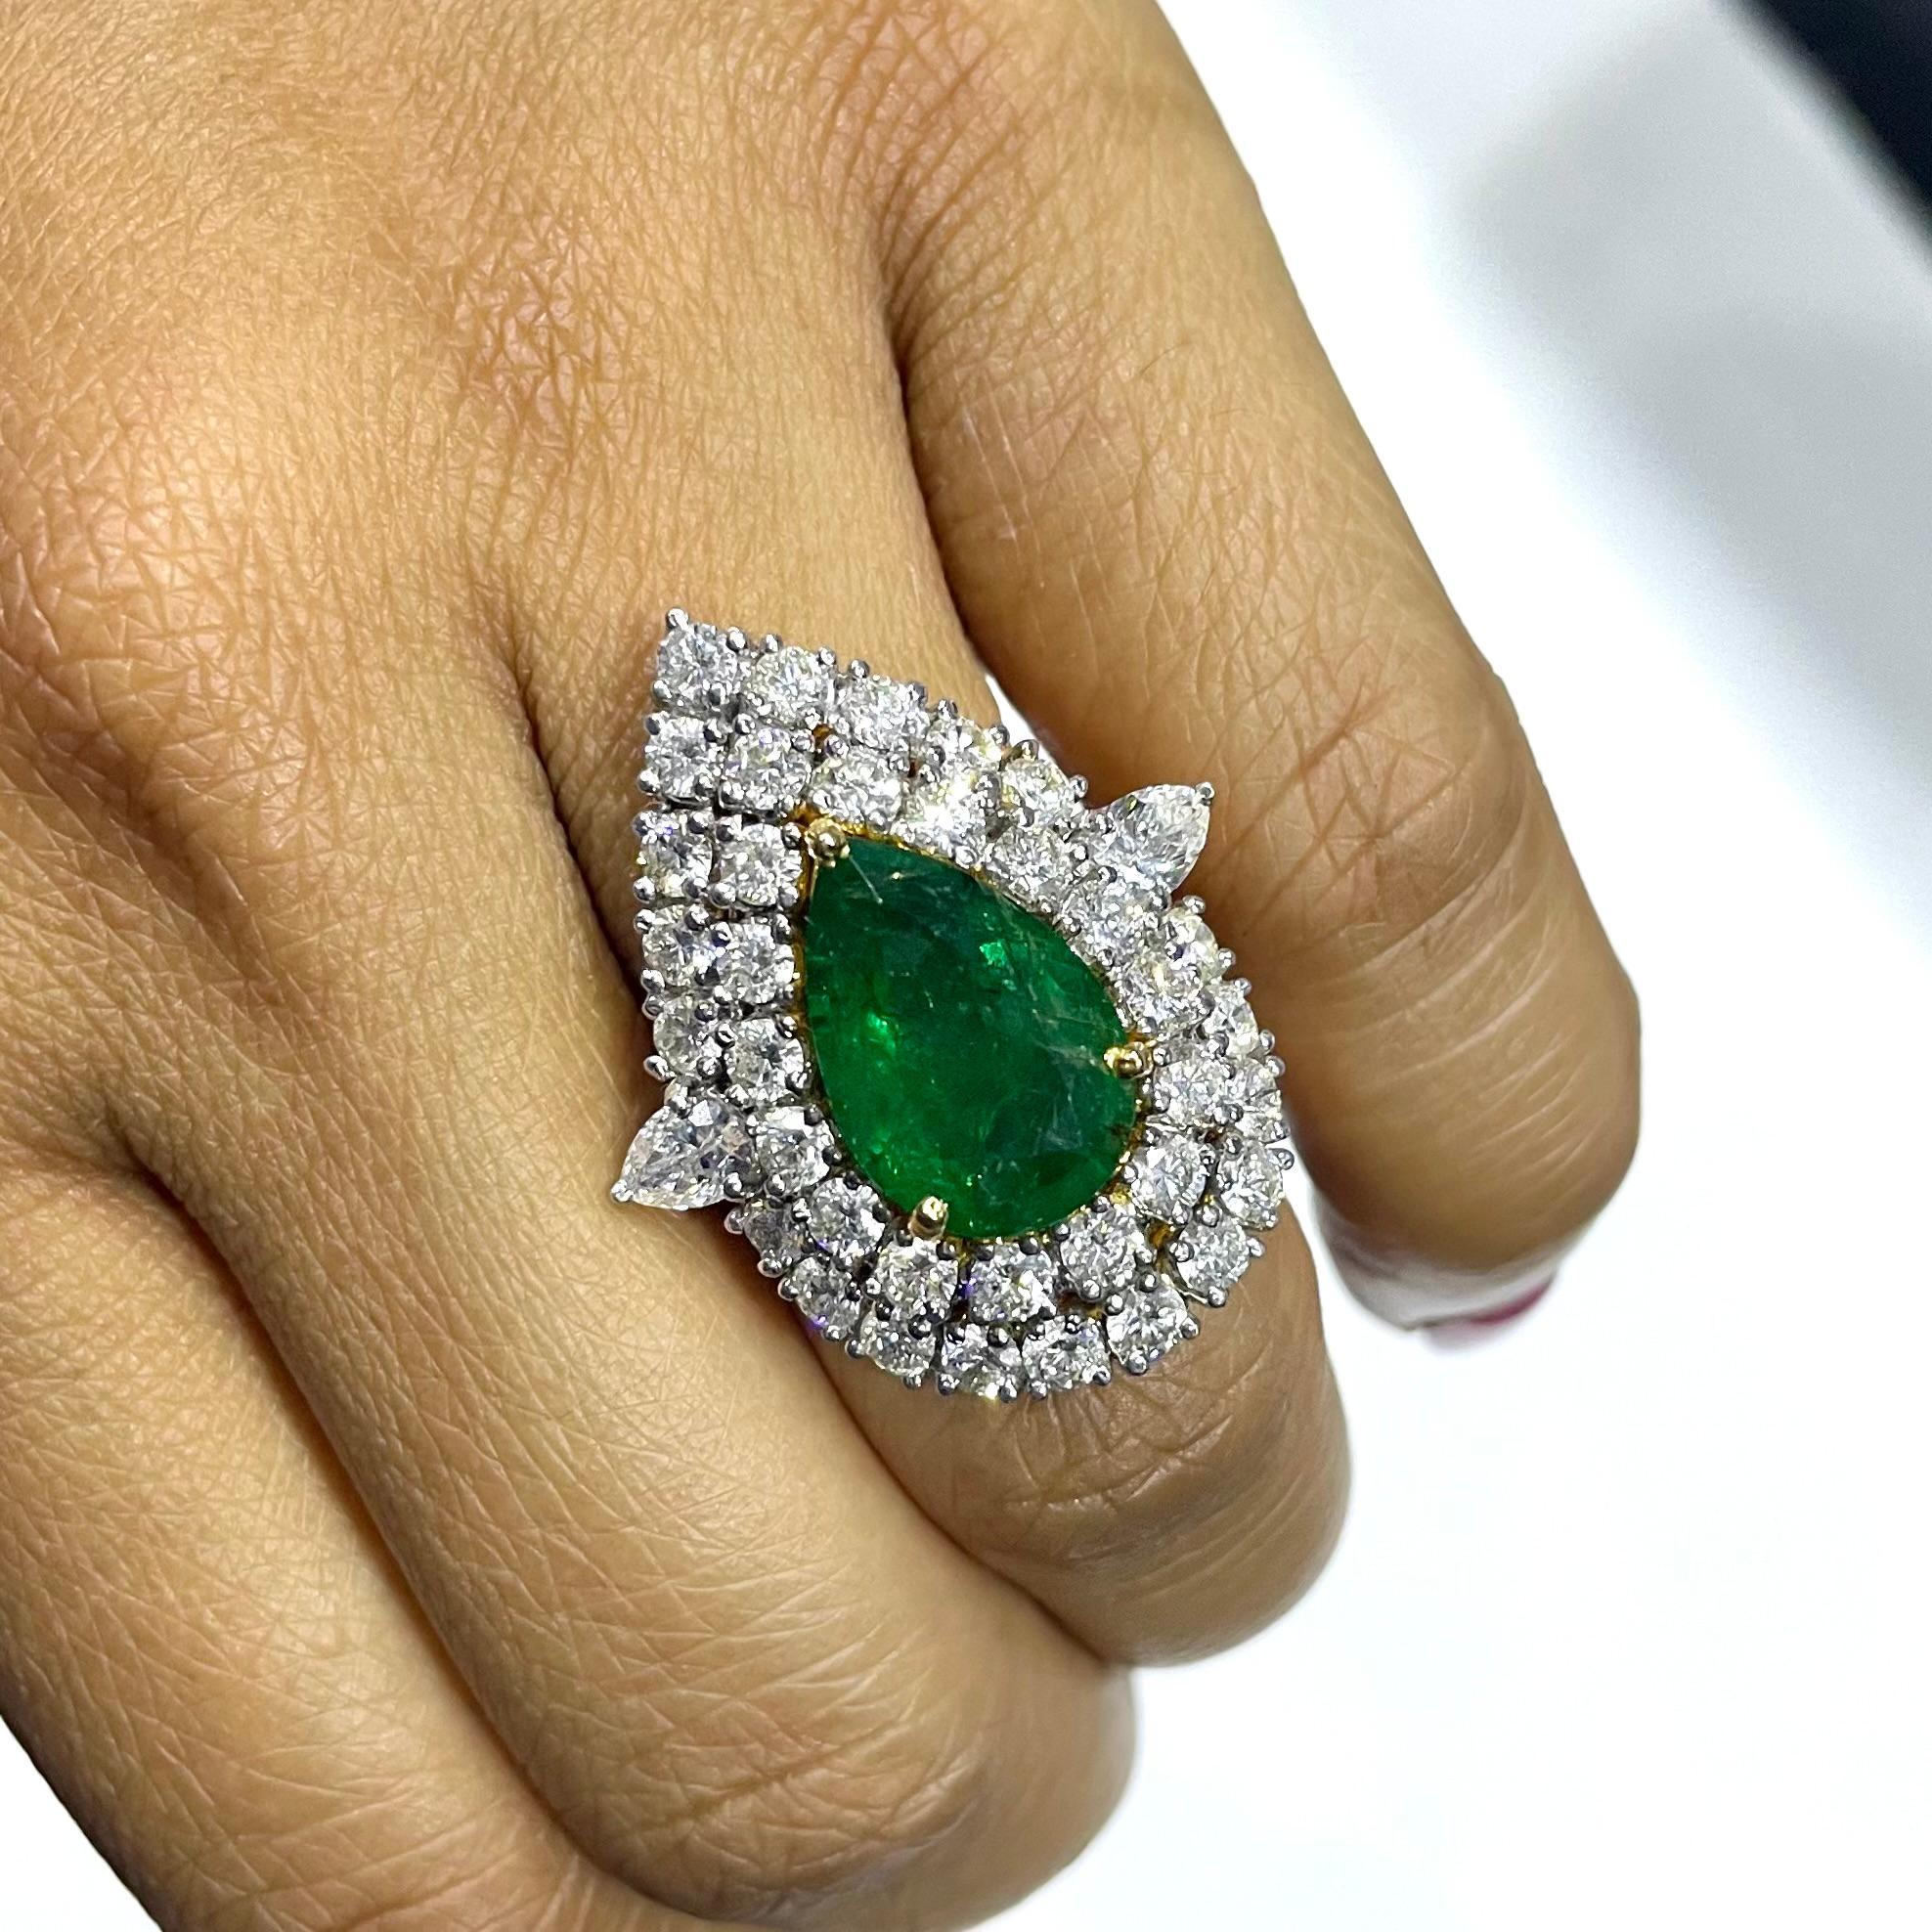 An impressive stated Pear Shape Emerald Ring to capture the attention of and dazzle the onlooker, the Yana ring is bold, sexy and stylish. With a natural deep green emerald at its core, surrounded by 2 rows of bright diamonds, the ring is